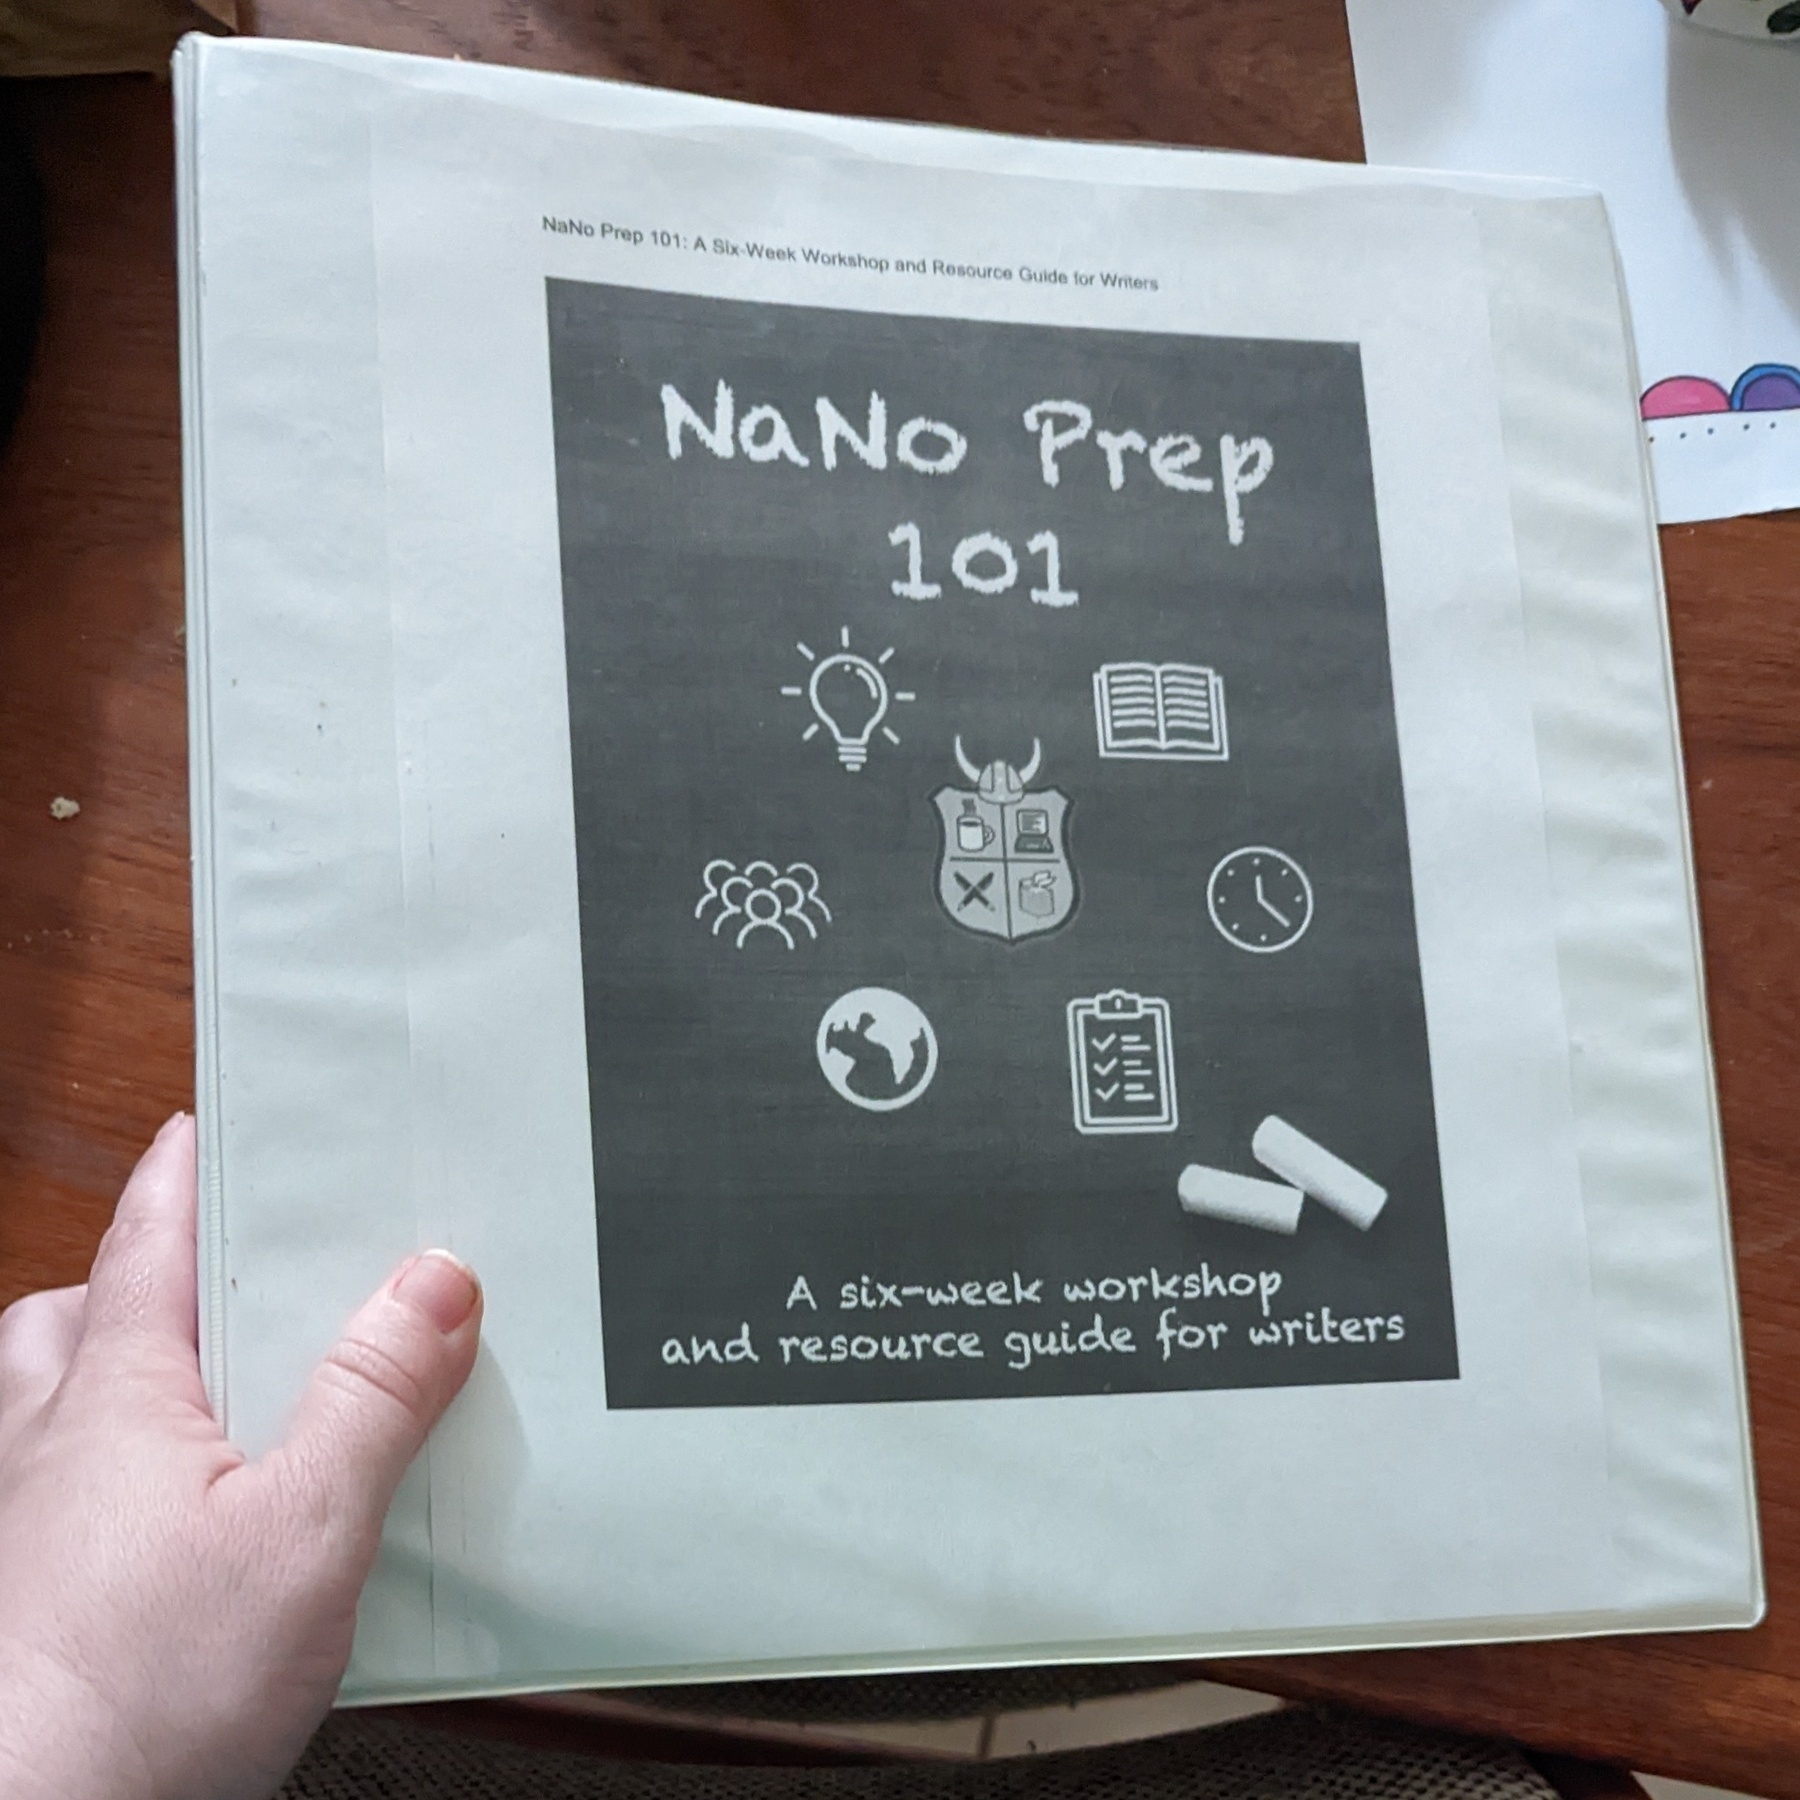 A hand holding a notebook with a cover that reads "NaNo Prep 101.“